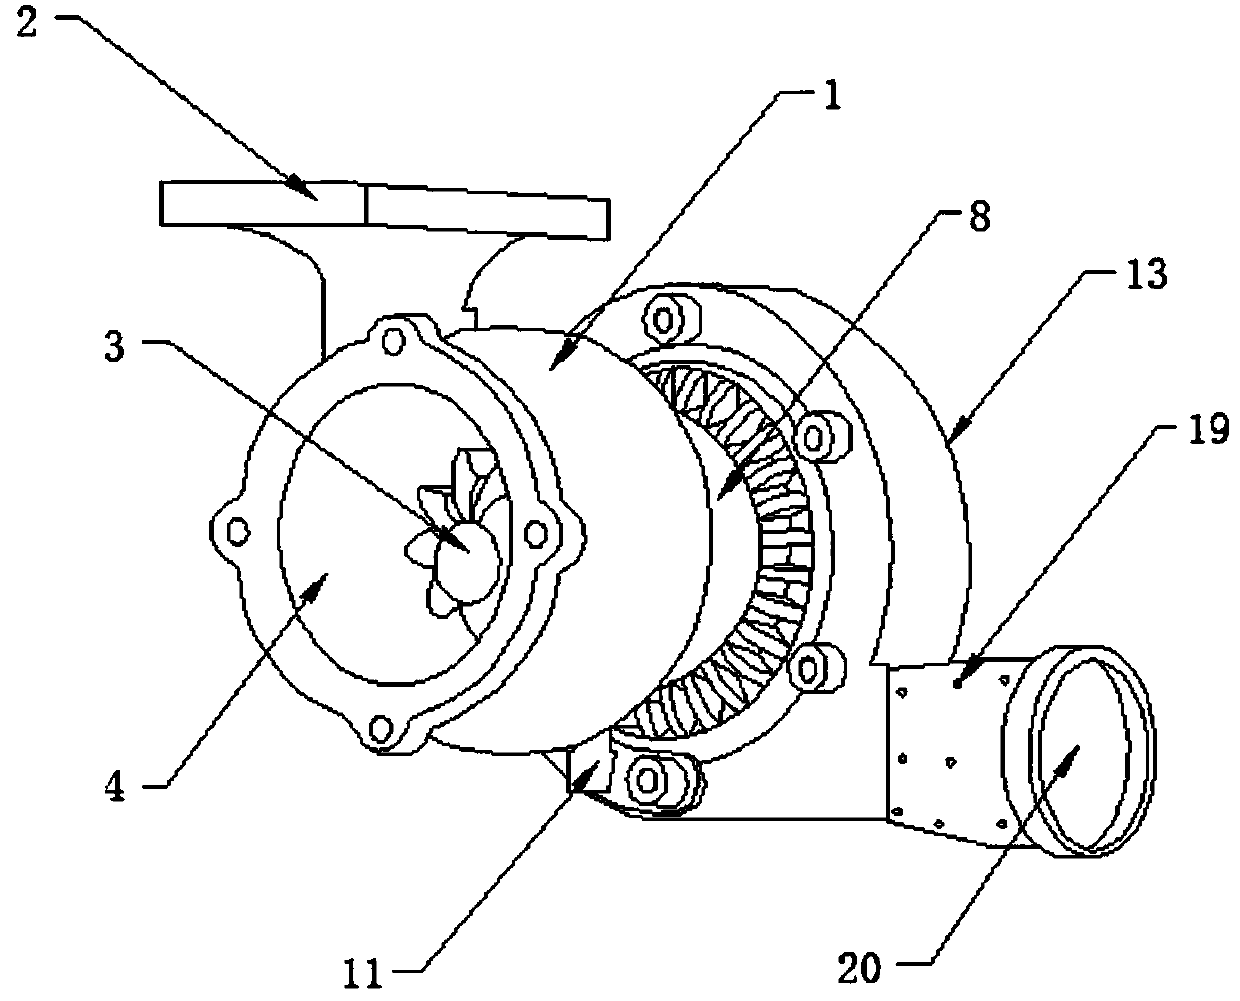 Turbocharger with remarkable noise reduction performance